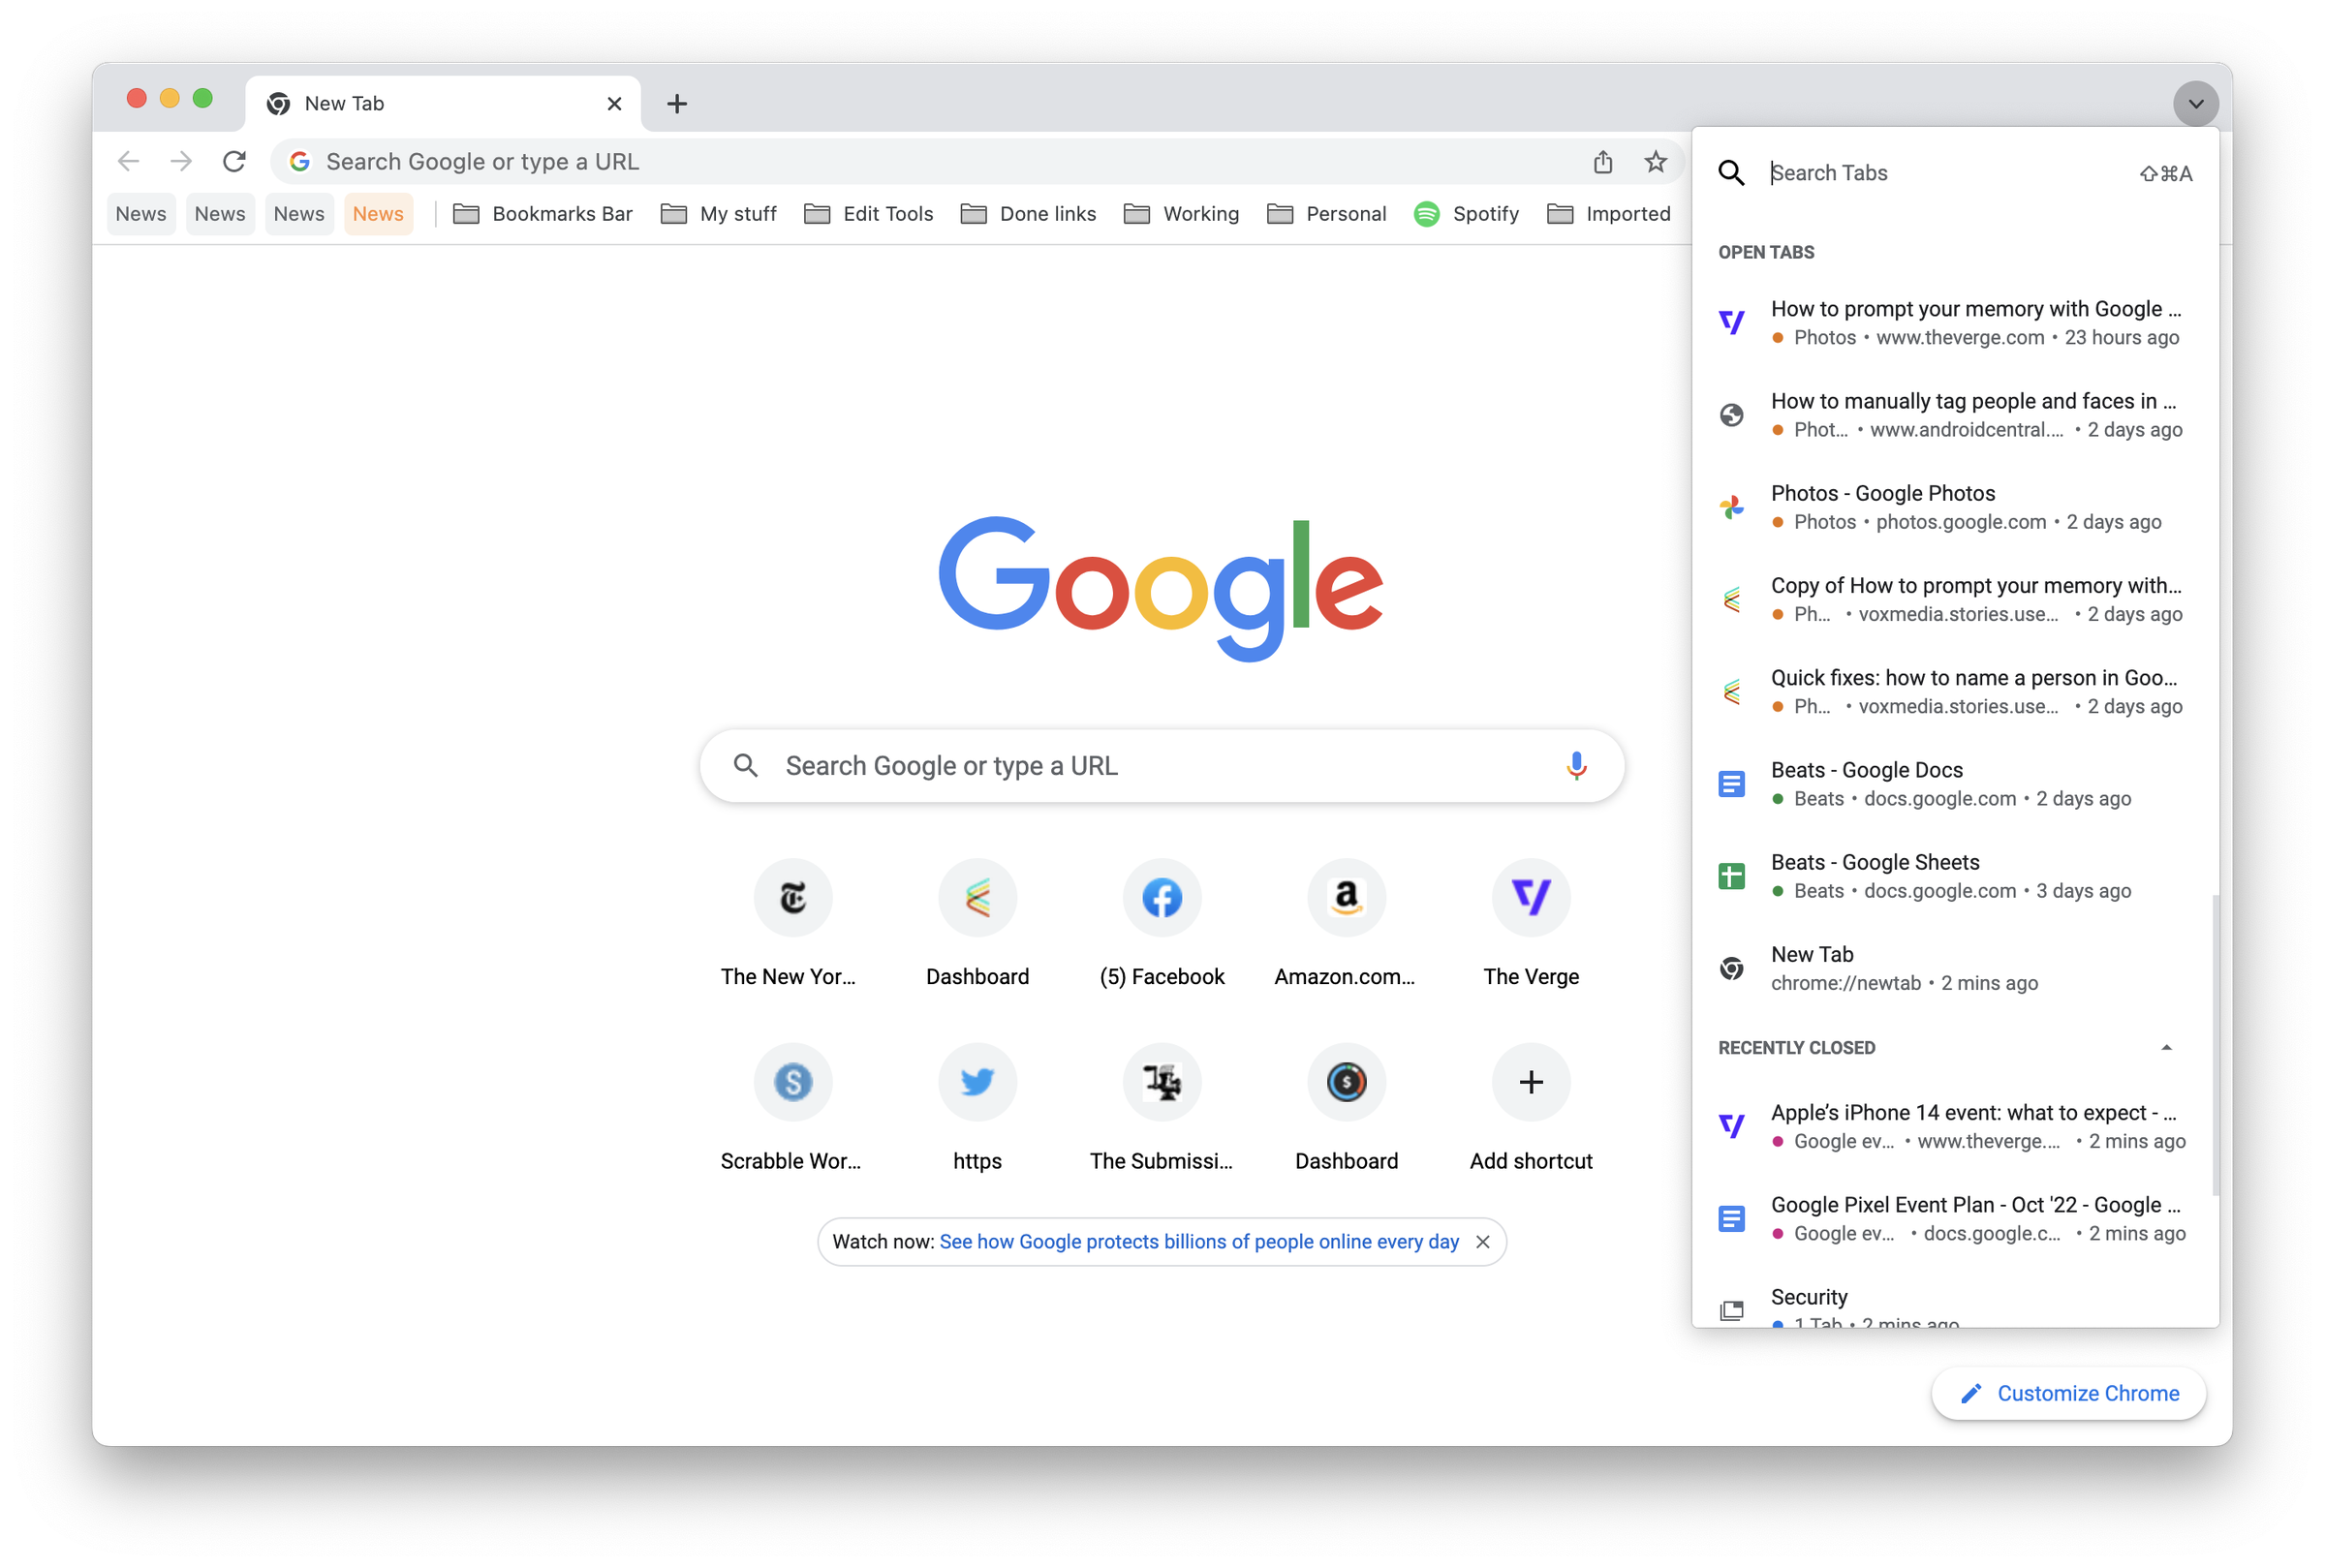 Google main page with Search Tabs drop down menu on the right.